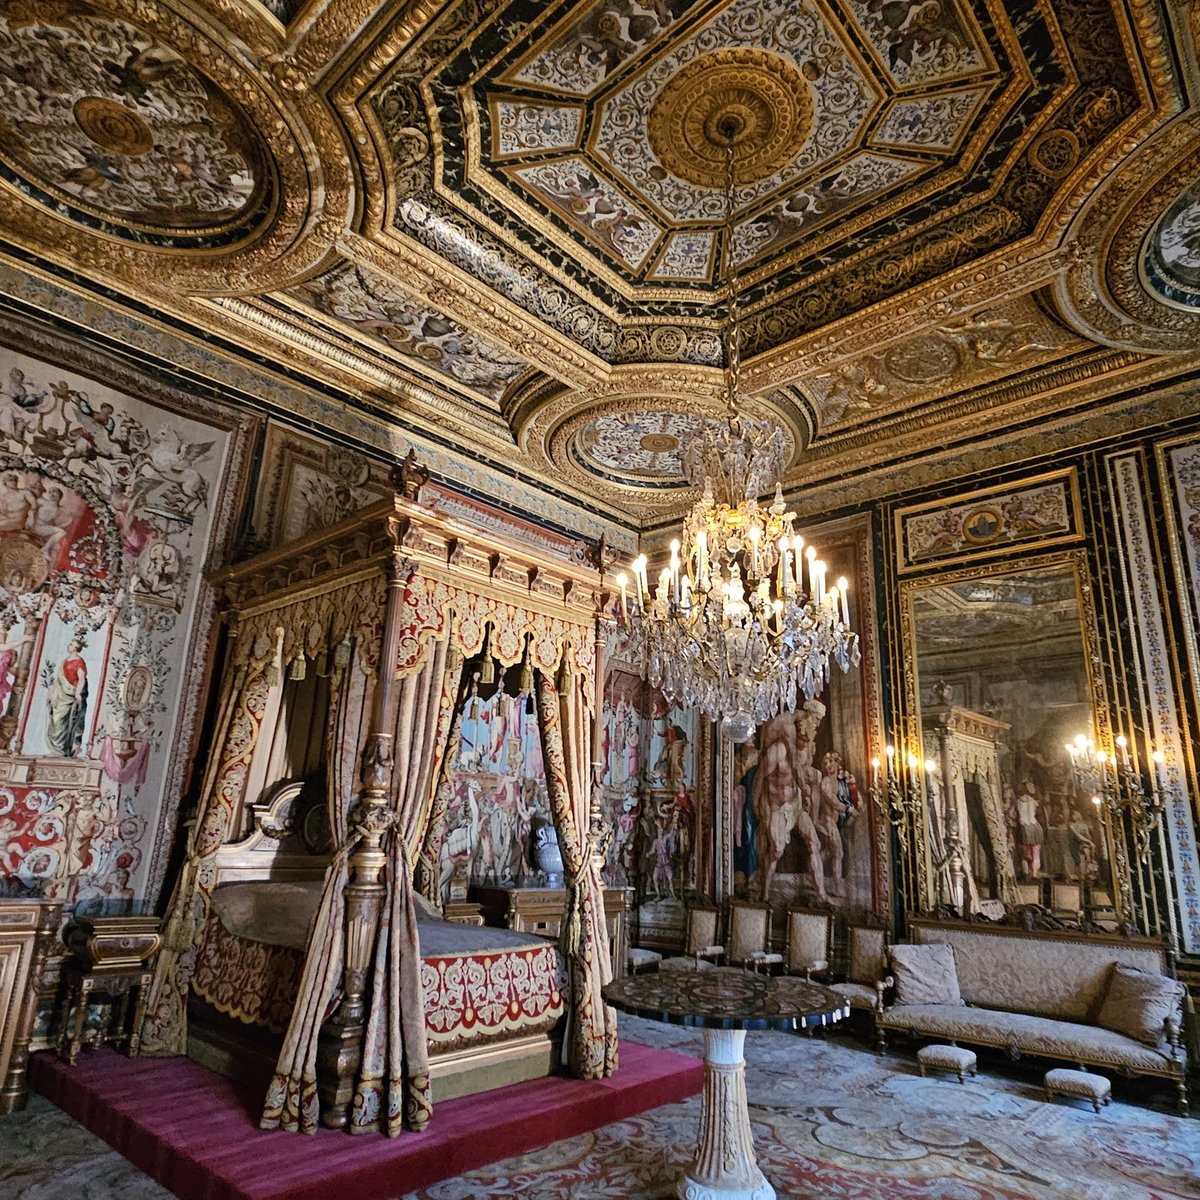 I'm currently standing in the bedroom of Anne of Austria, mother of Louis XIV and ngl, lads, it's a LOT.